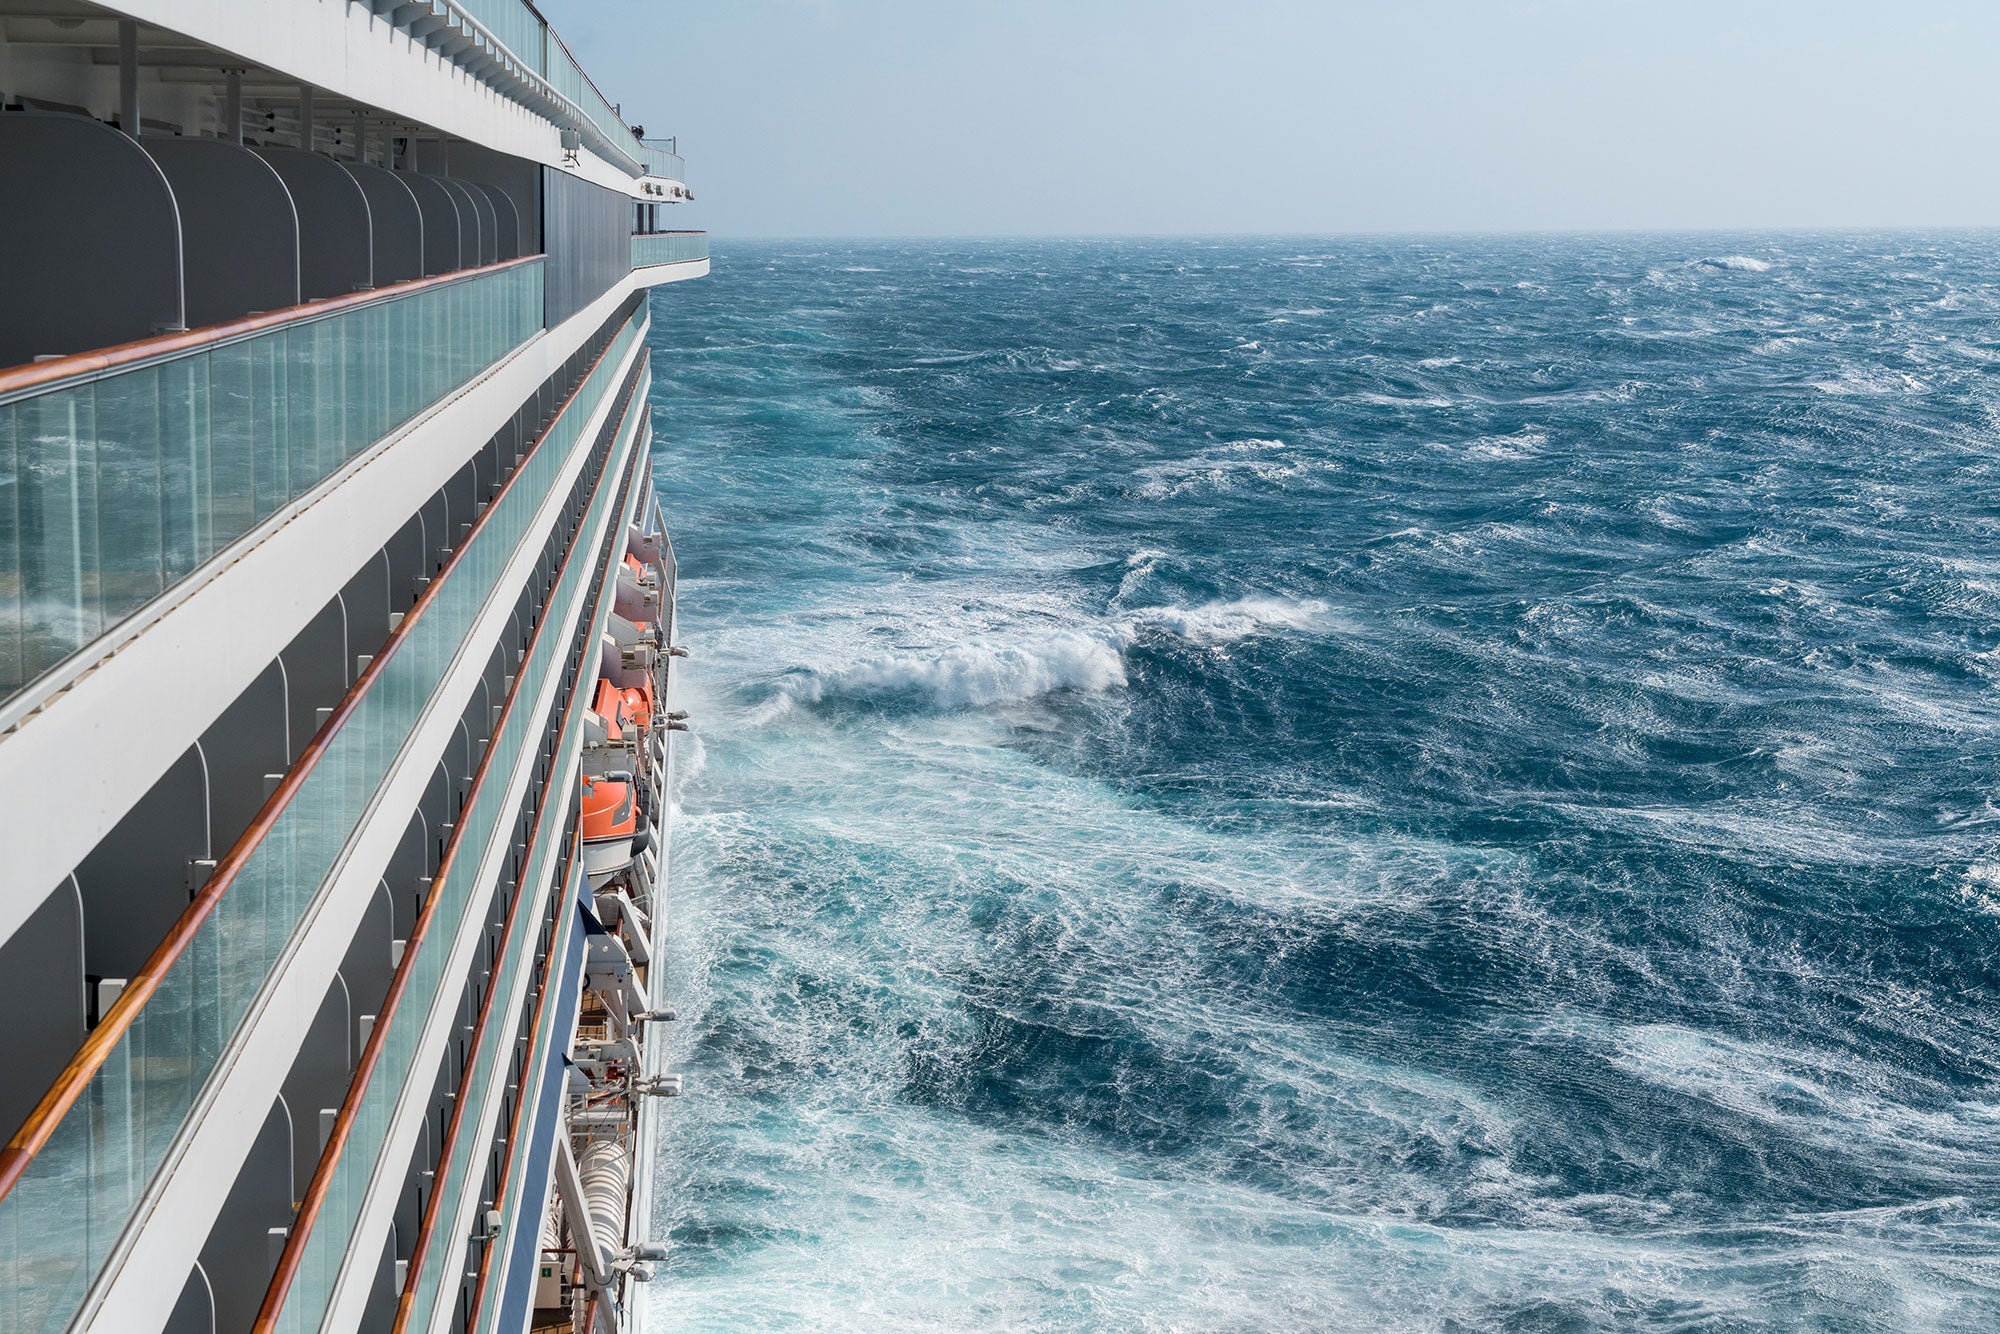 Bonus vacation or choppy nightmare? Here's what it's like on a cruise ship stuck at sea during a hurricane